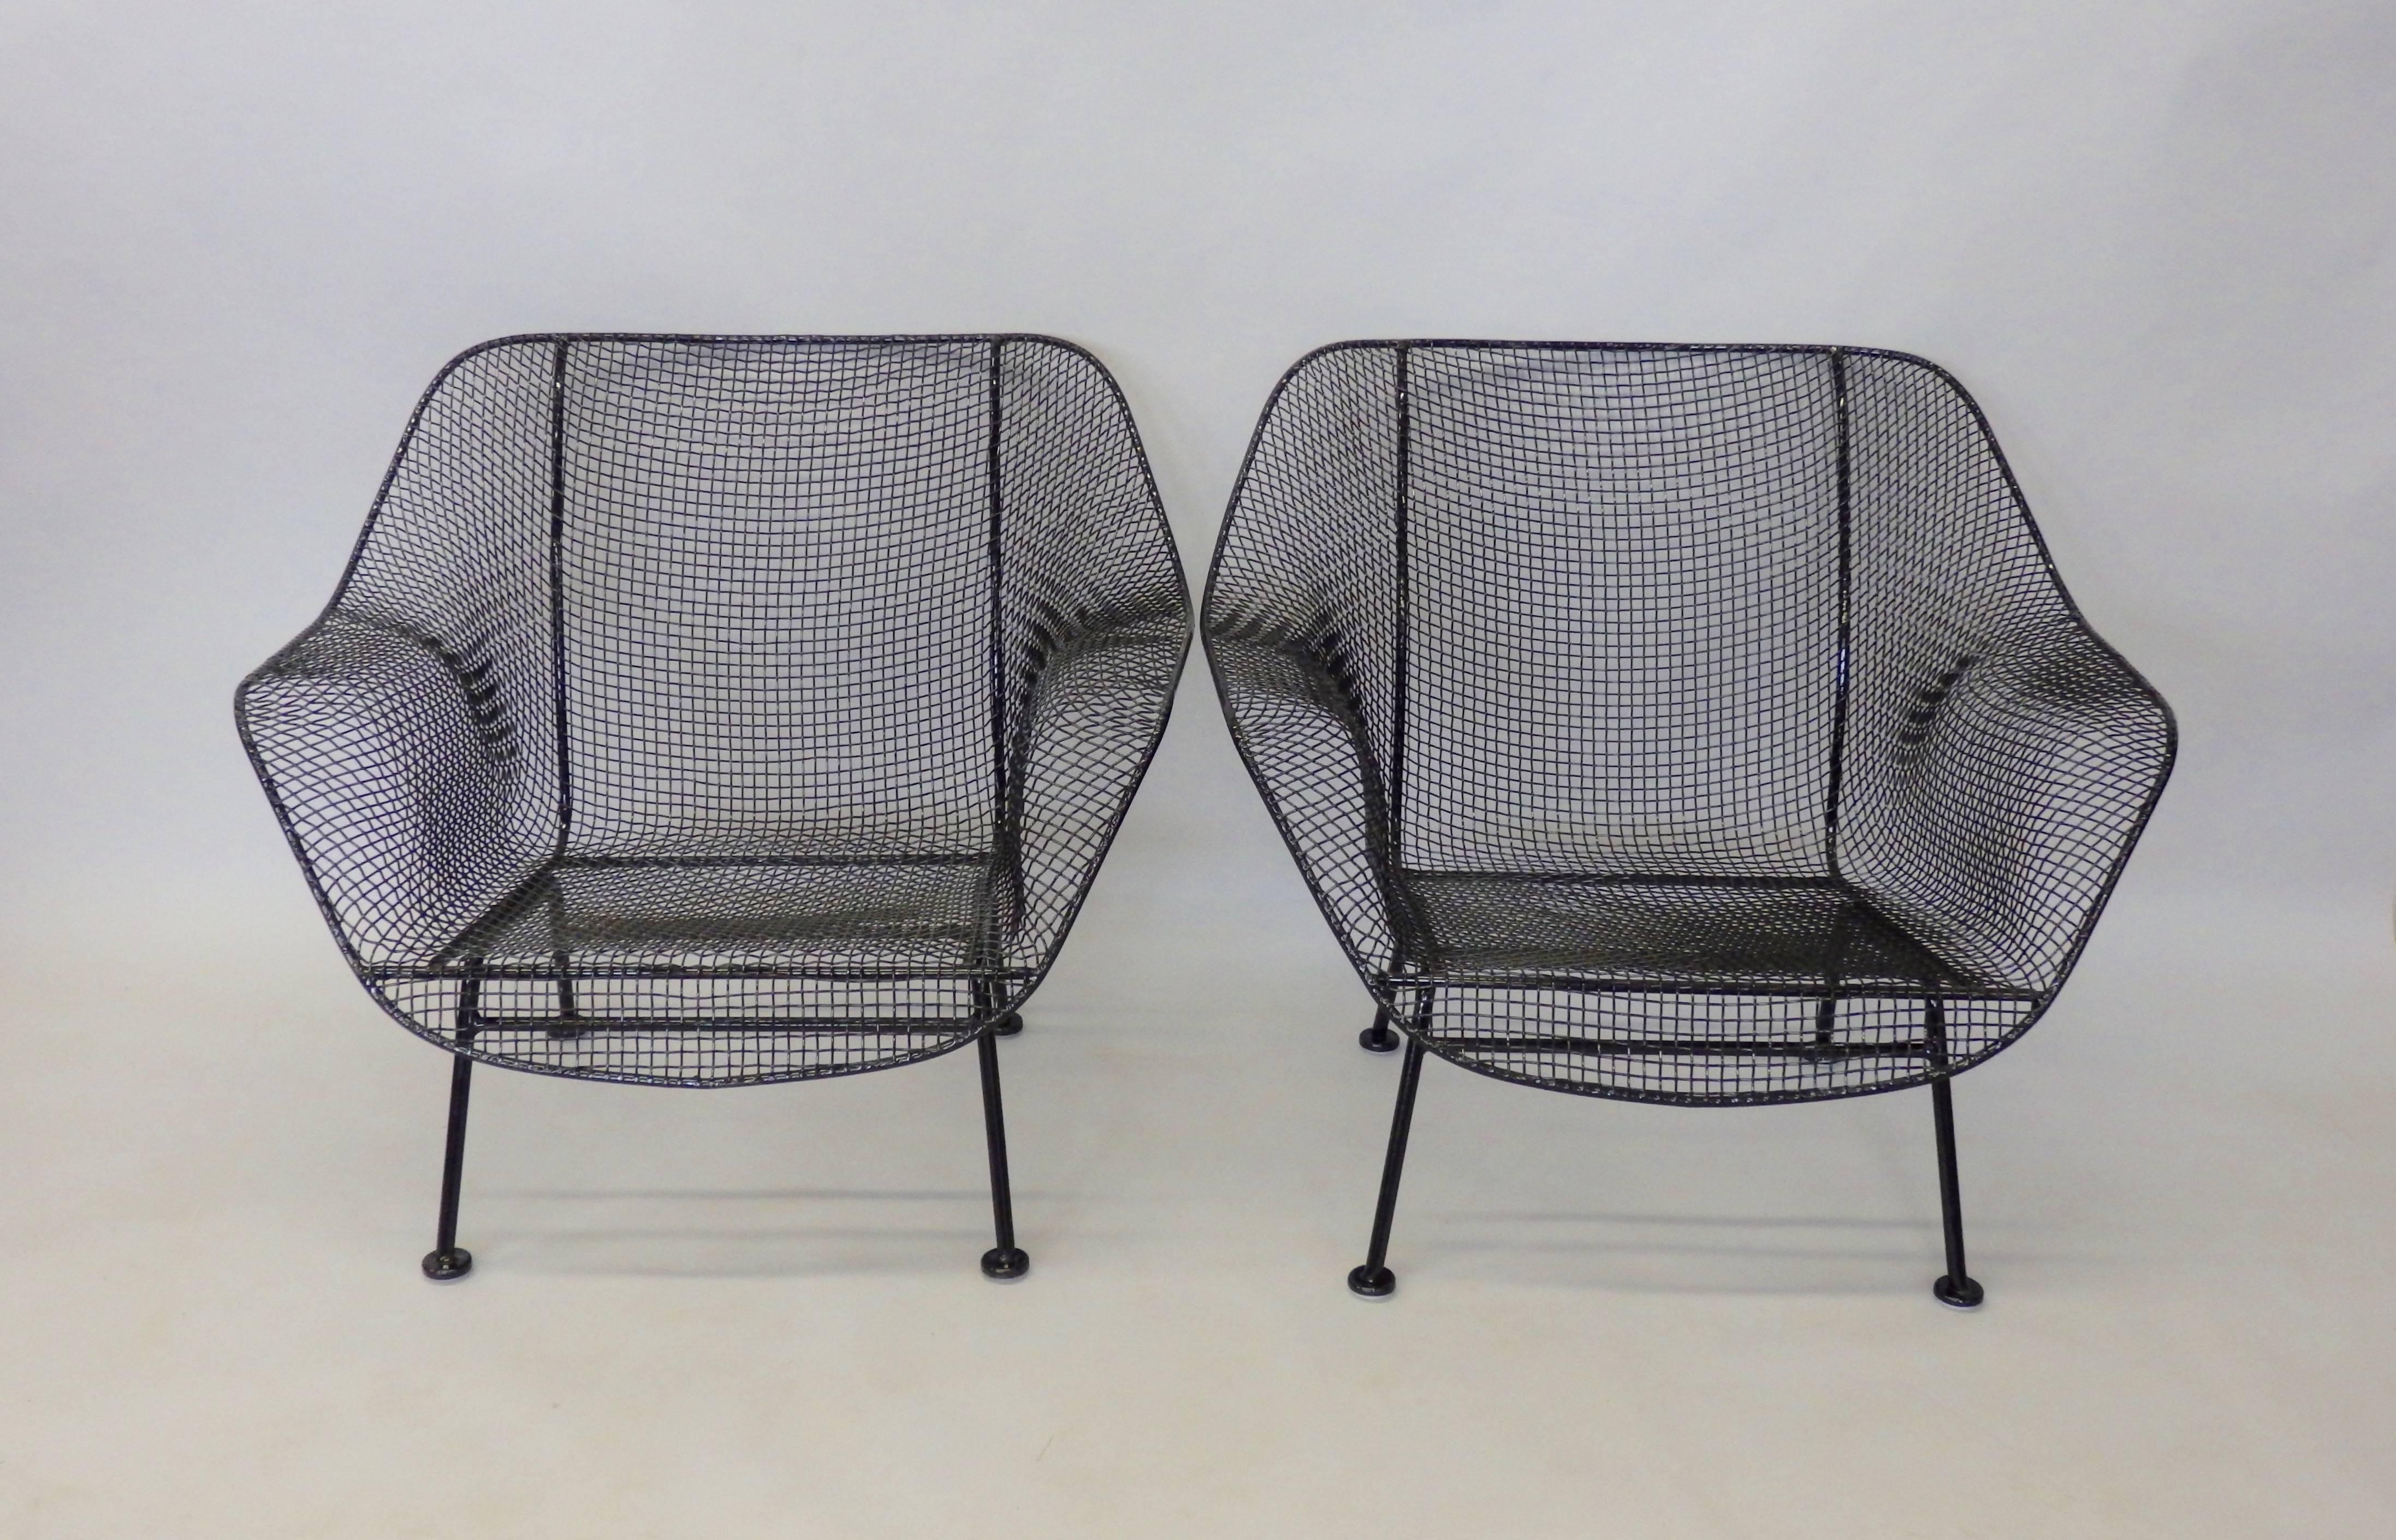 Powder-Coated Nicely Restored John Woodard Wrought Iron with Steel Mesh Lounge Chairs